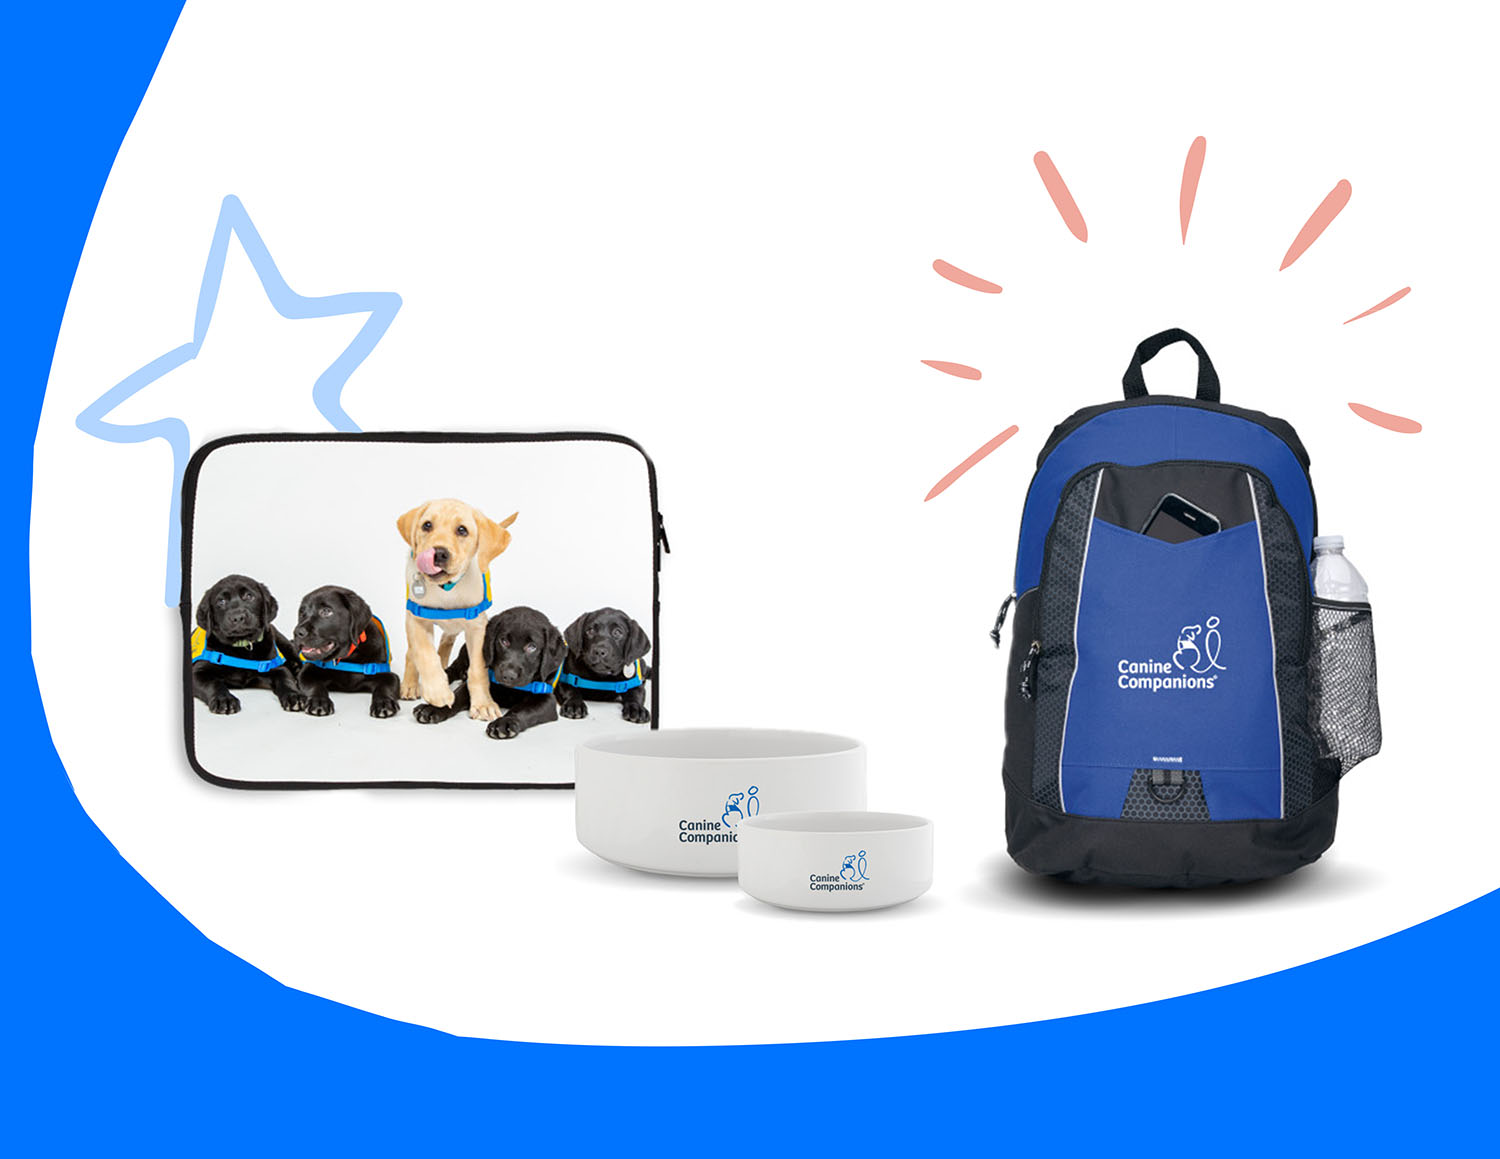 Image of canine companions branded backpack, bowls, and laptop cover